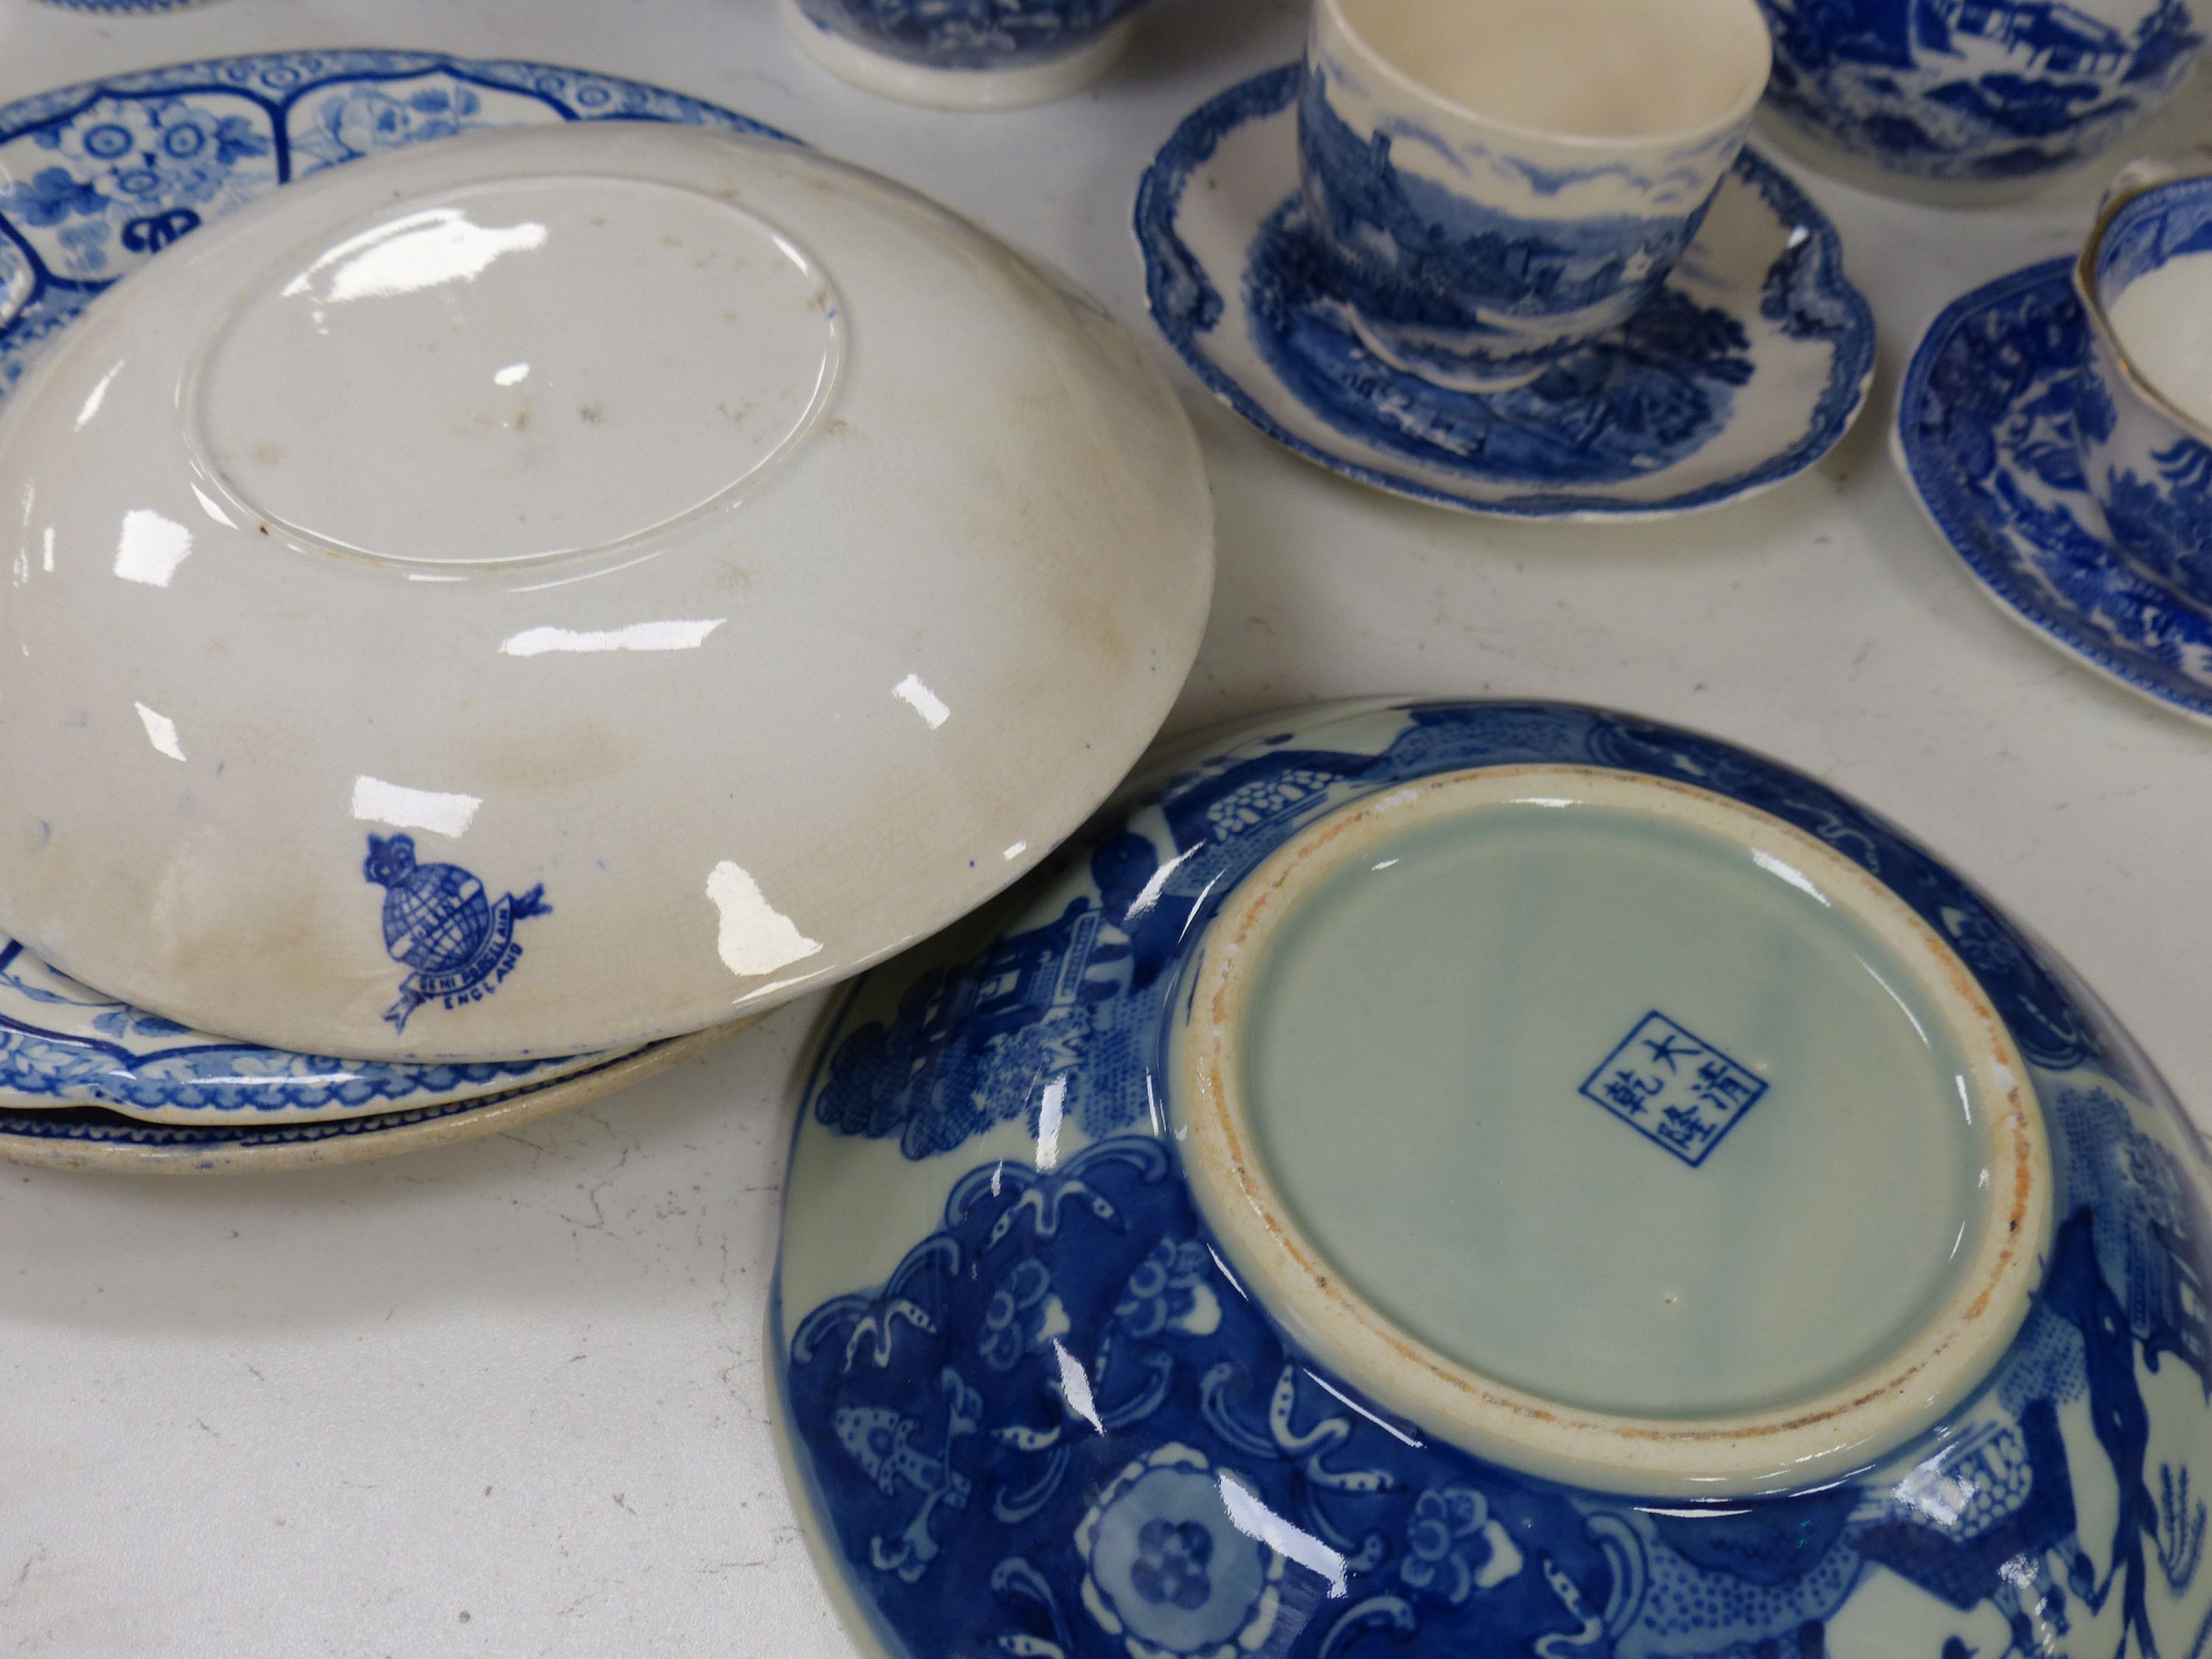 A quantity of 19th century Staffordshire blue and white plates, jugs etc